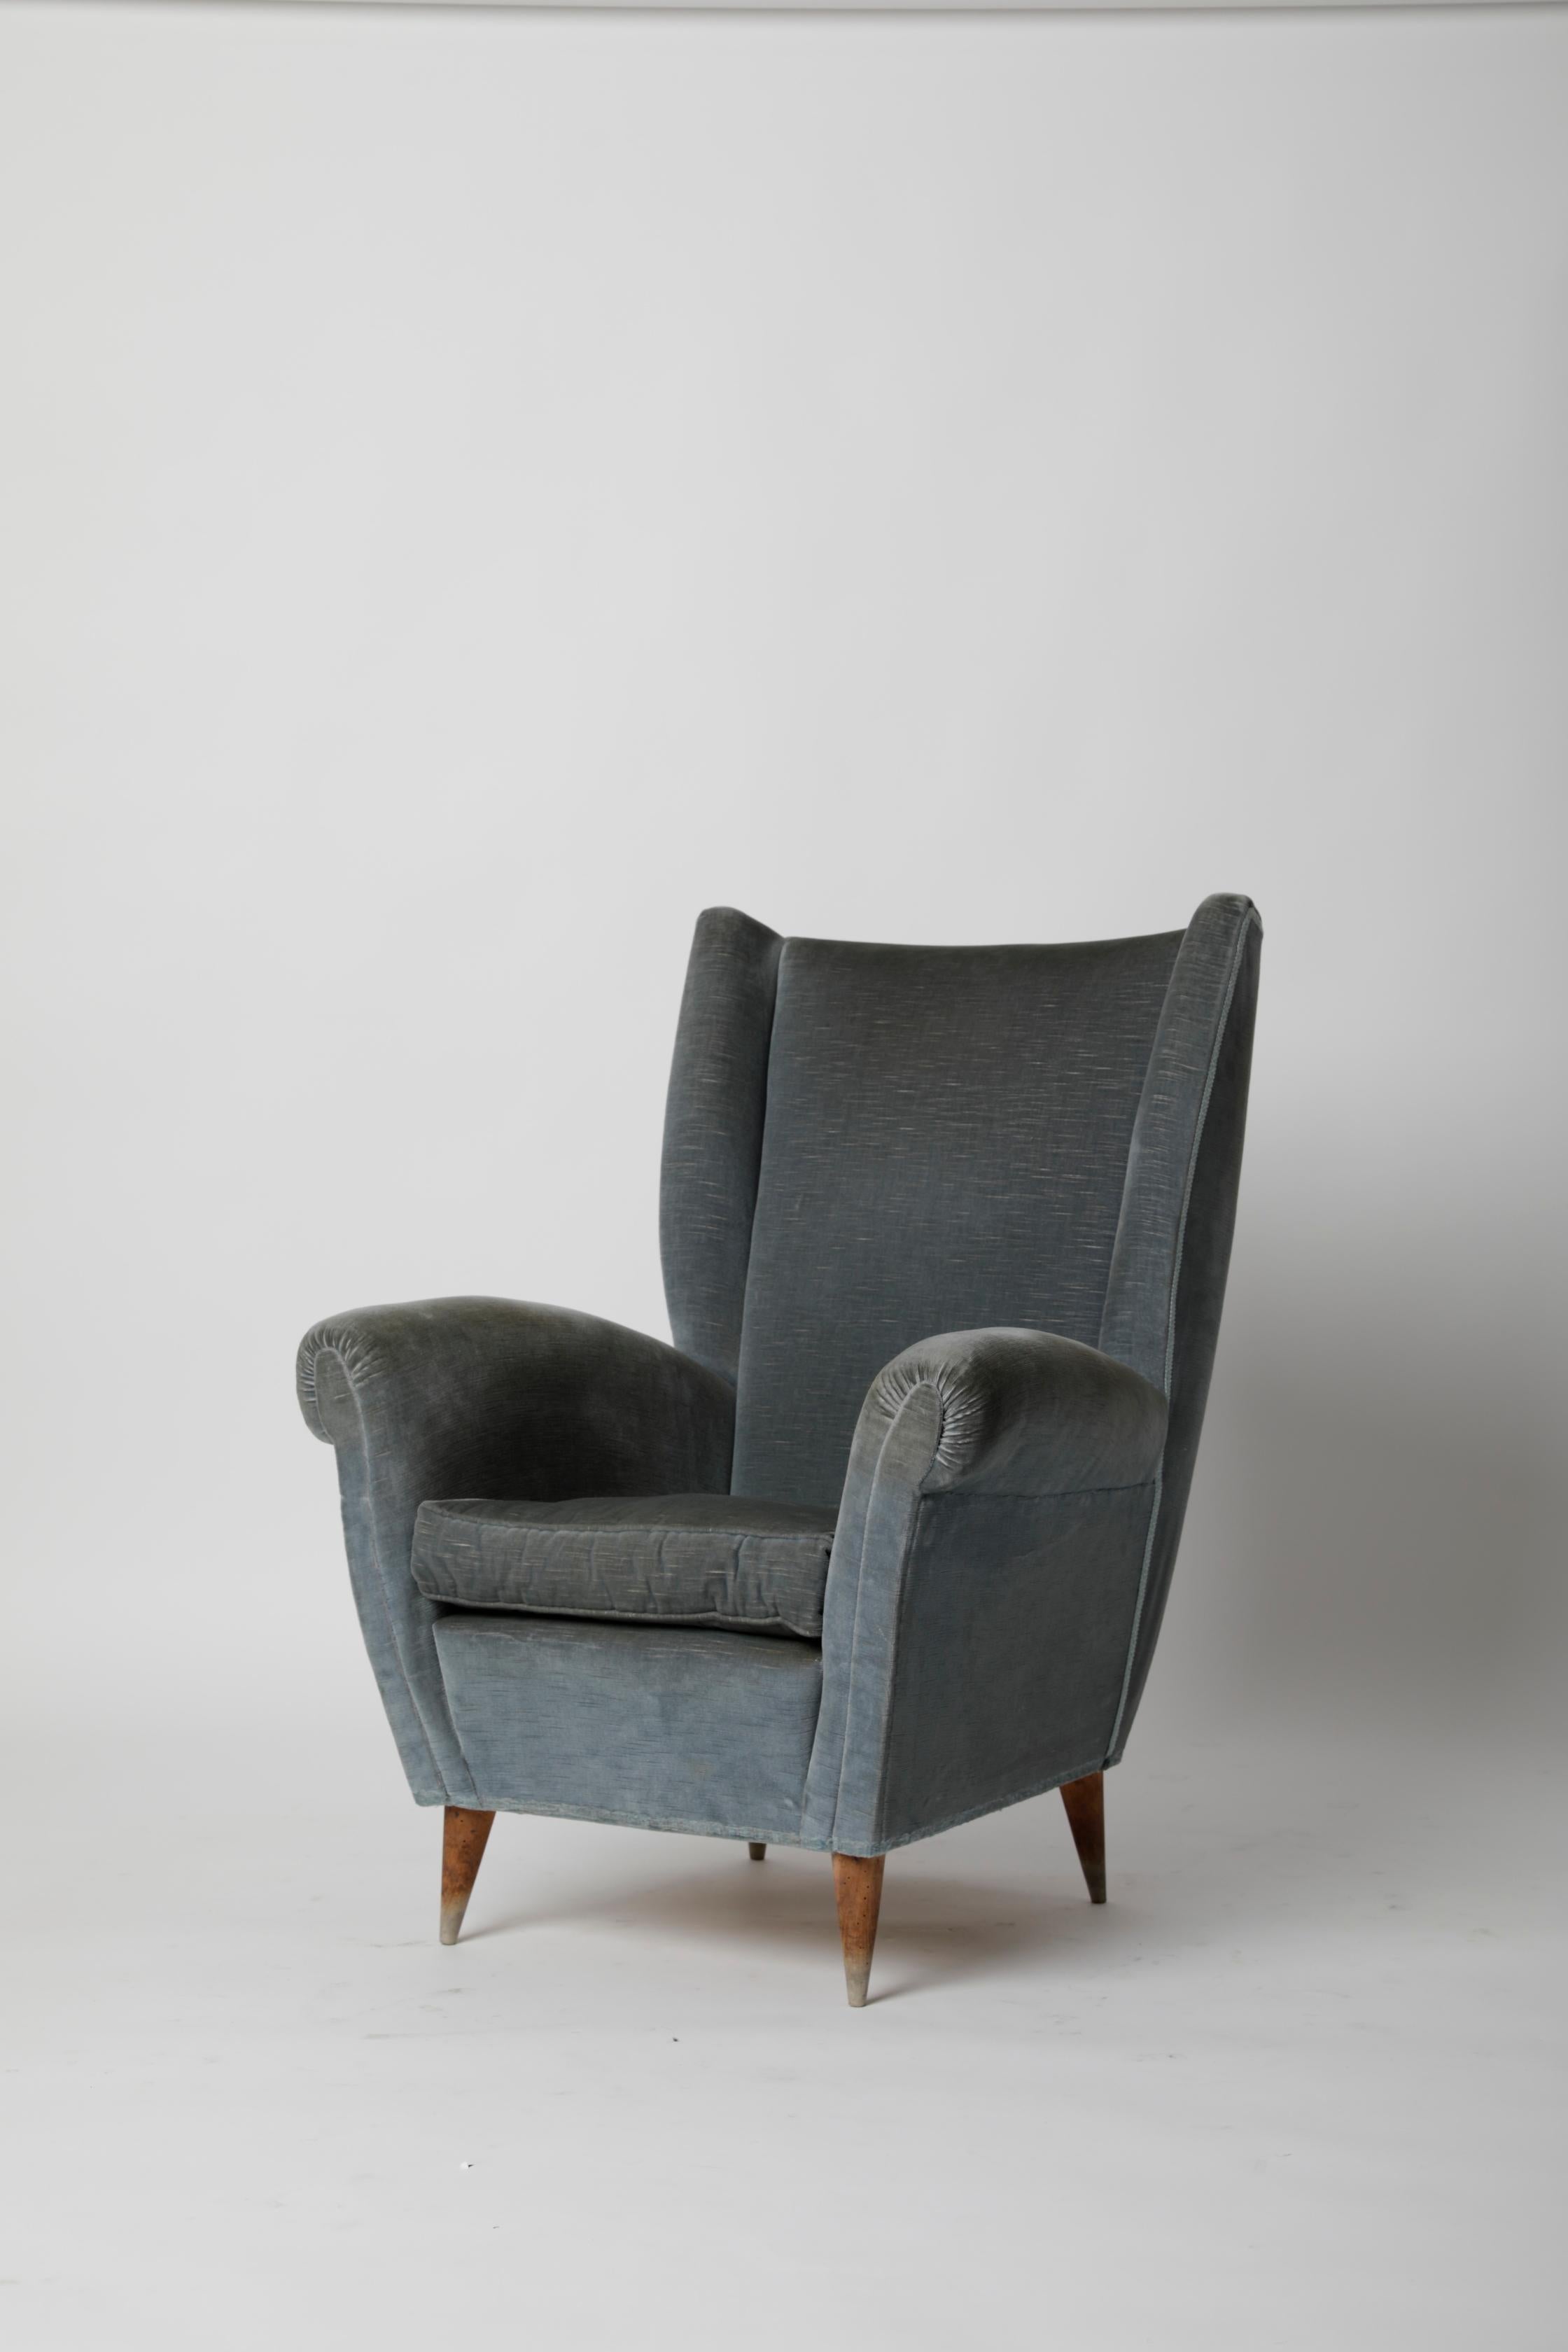 Pair of Italian armchairs attributed to Gio Ponti for I.S.A. Bergamo
Structure in wood and upholstery in light blue fabric.
The armchairs are very refined and are suitable for furnishing an elegant living room, if desired, the relative sofa is also